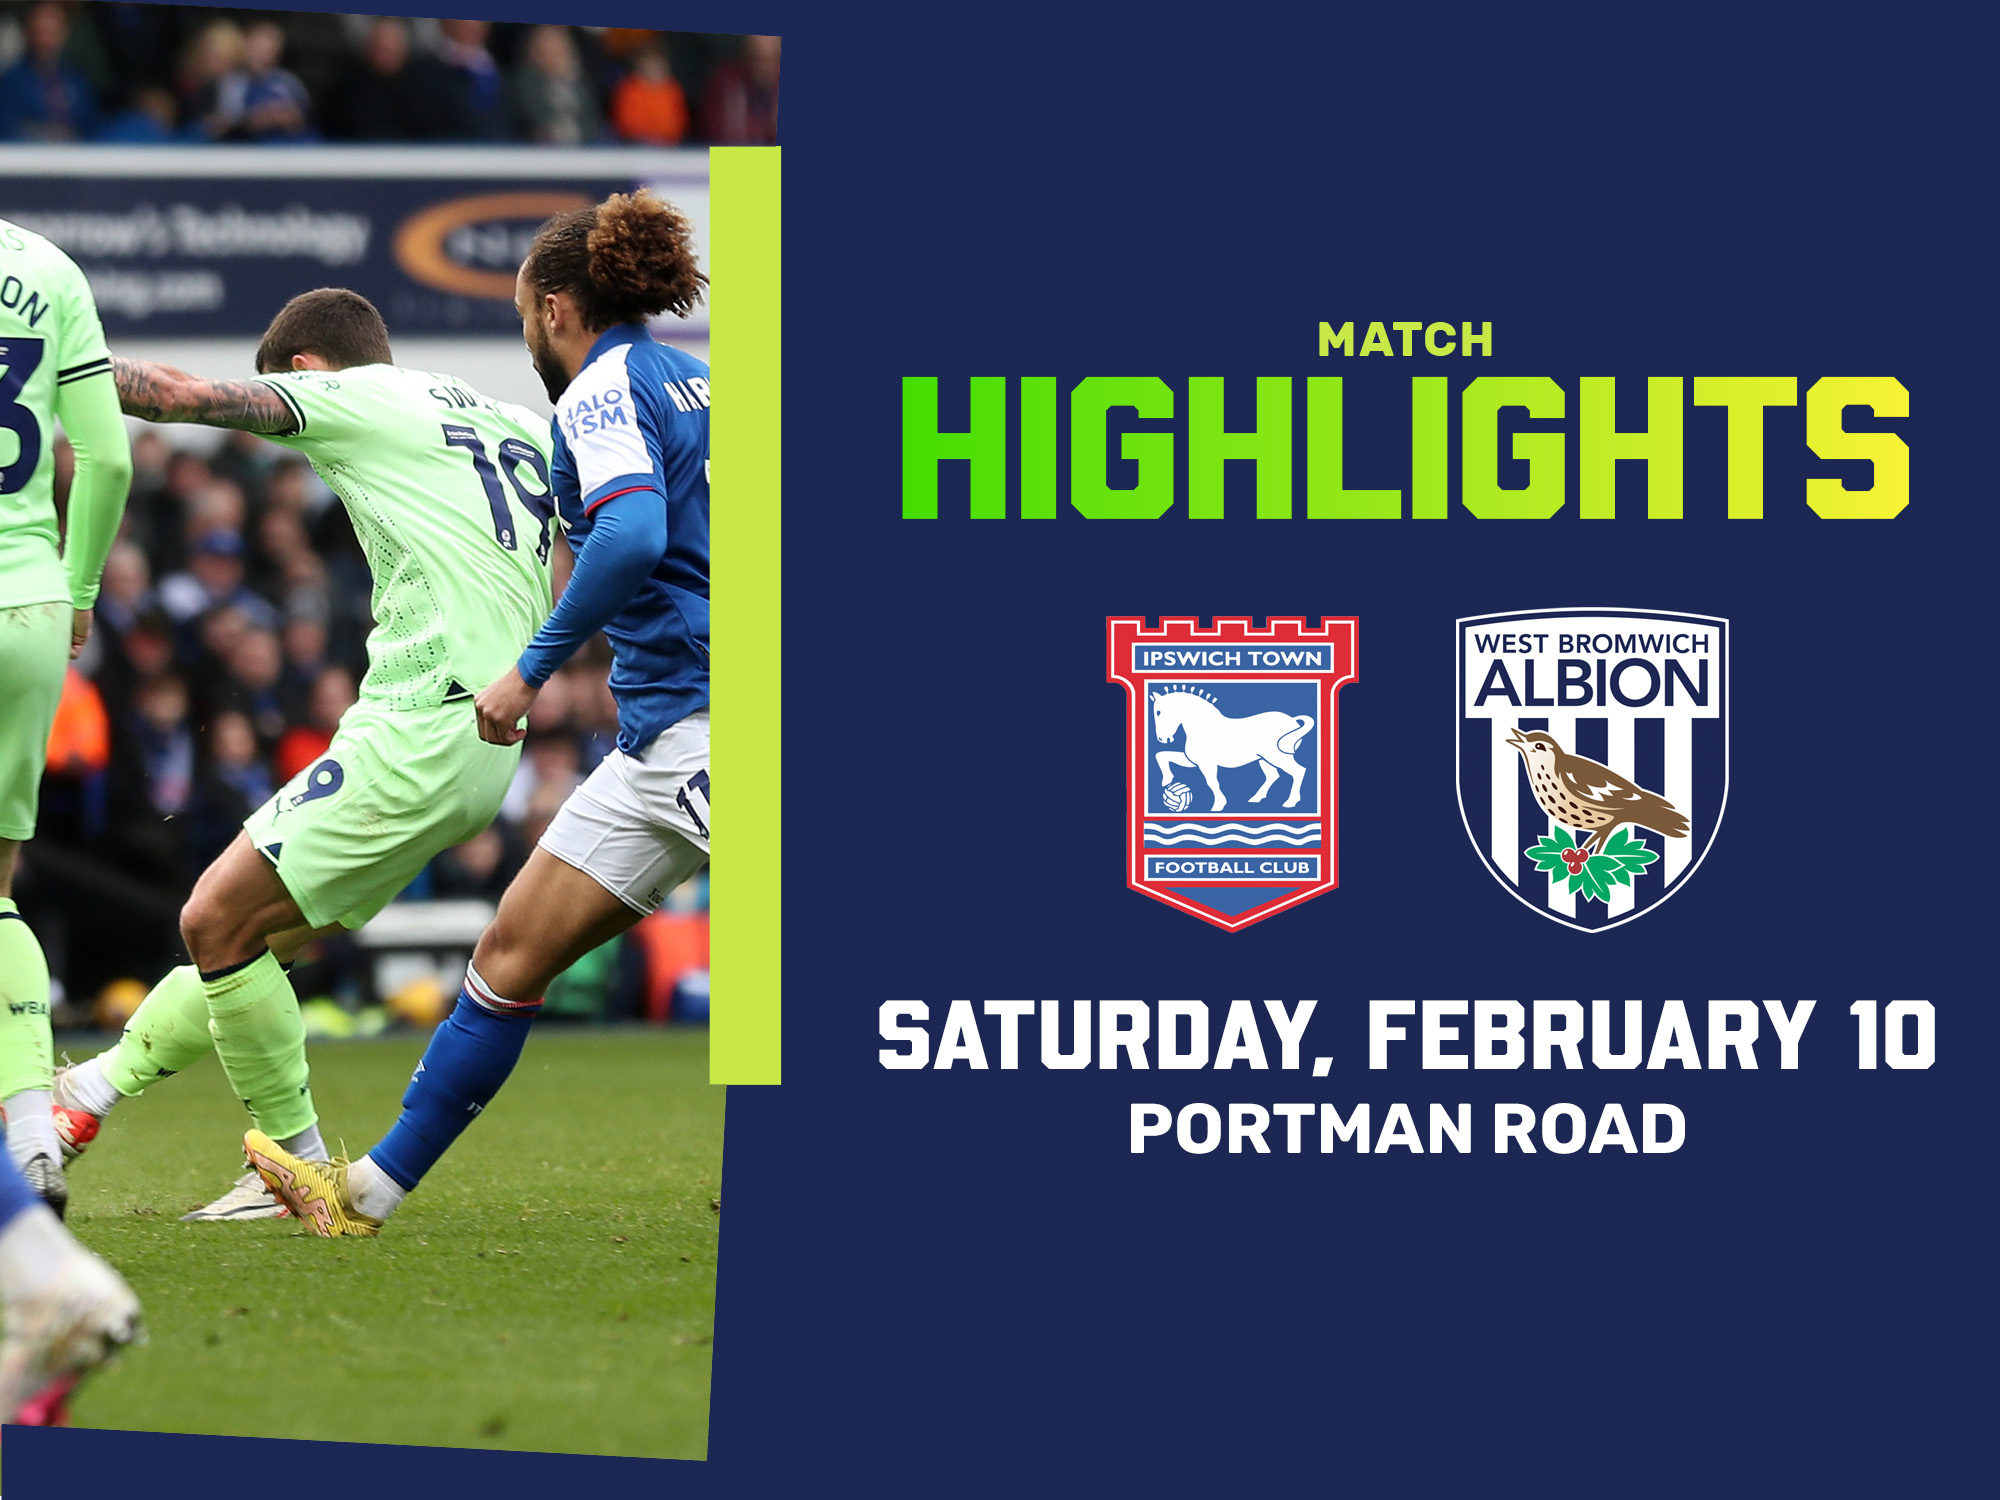 A match highlights photo graphic, with the club crests of Ipswich and Albion on, with a photo of John Swift in the green away kit